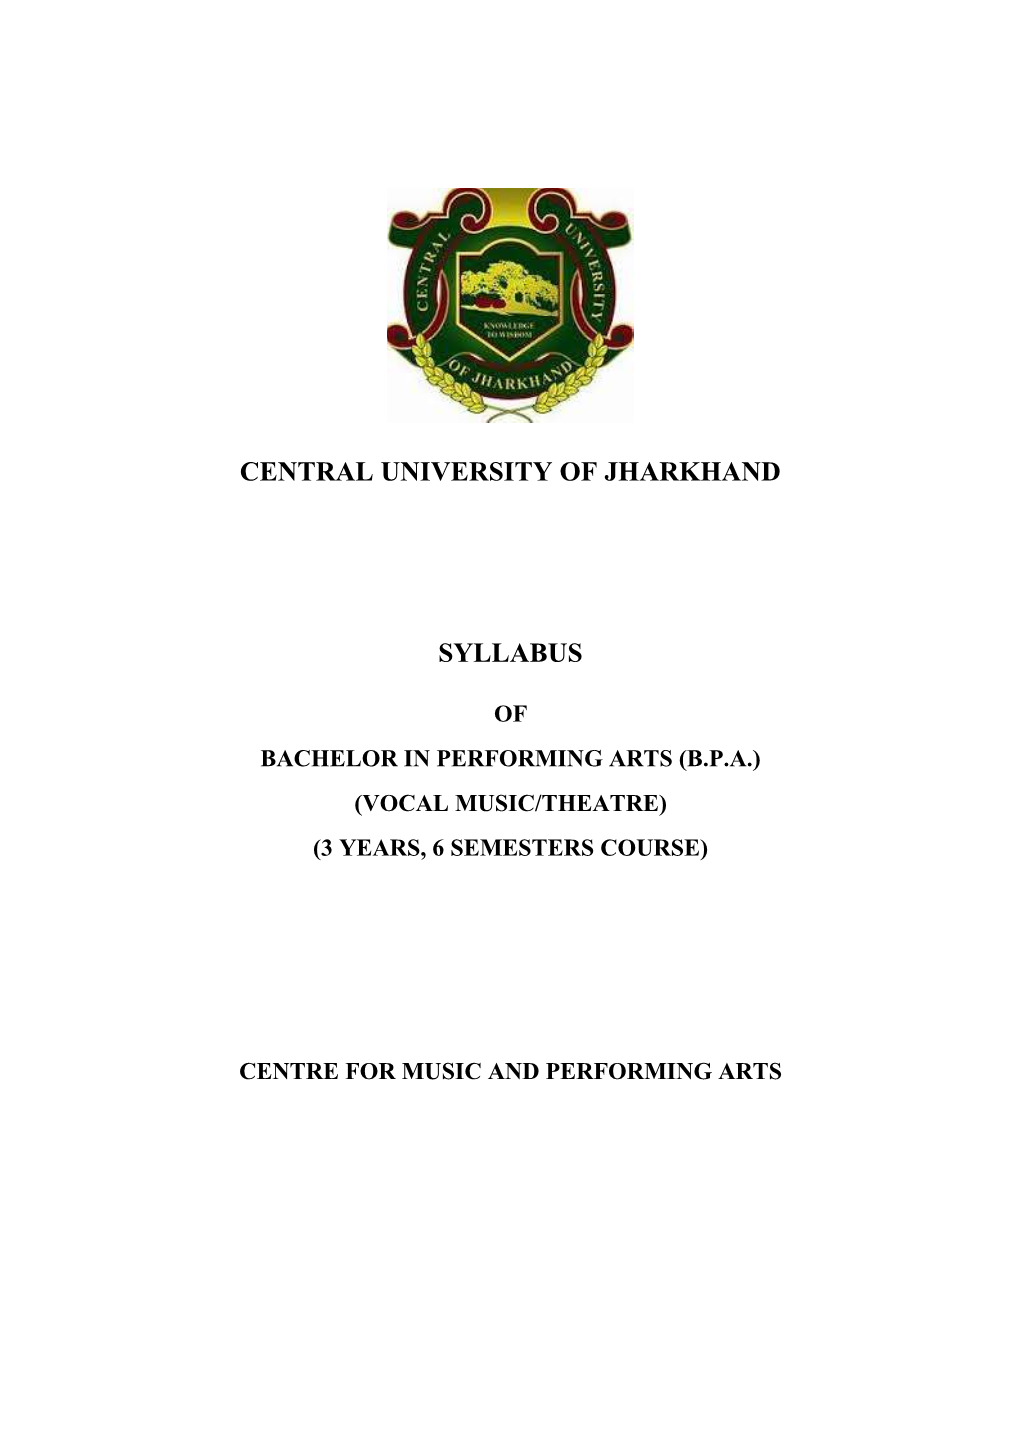 Central University of Jharkhand Syllabus